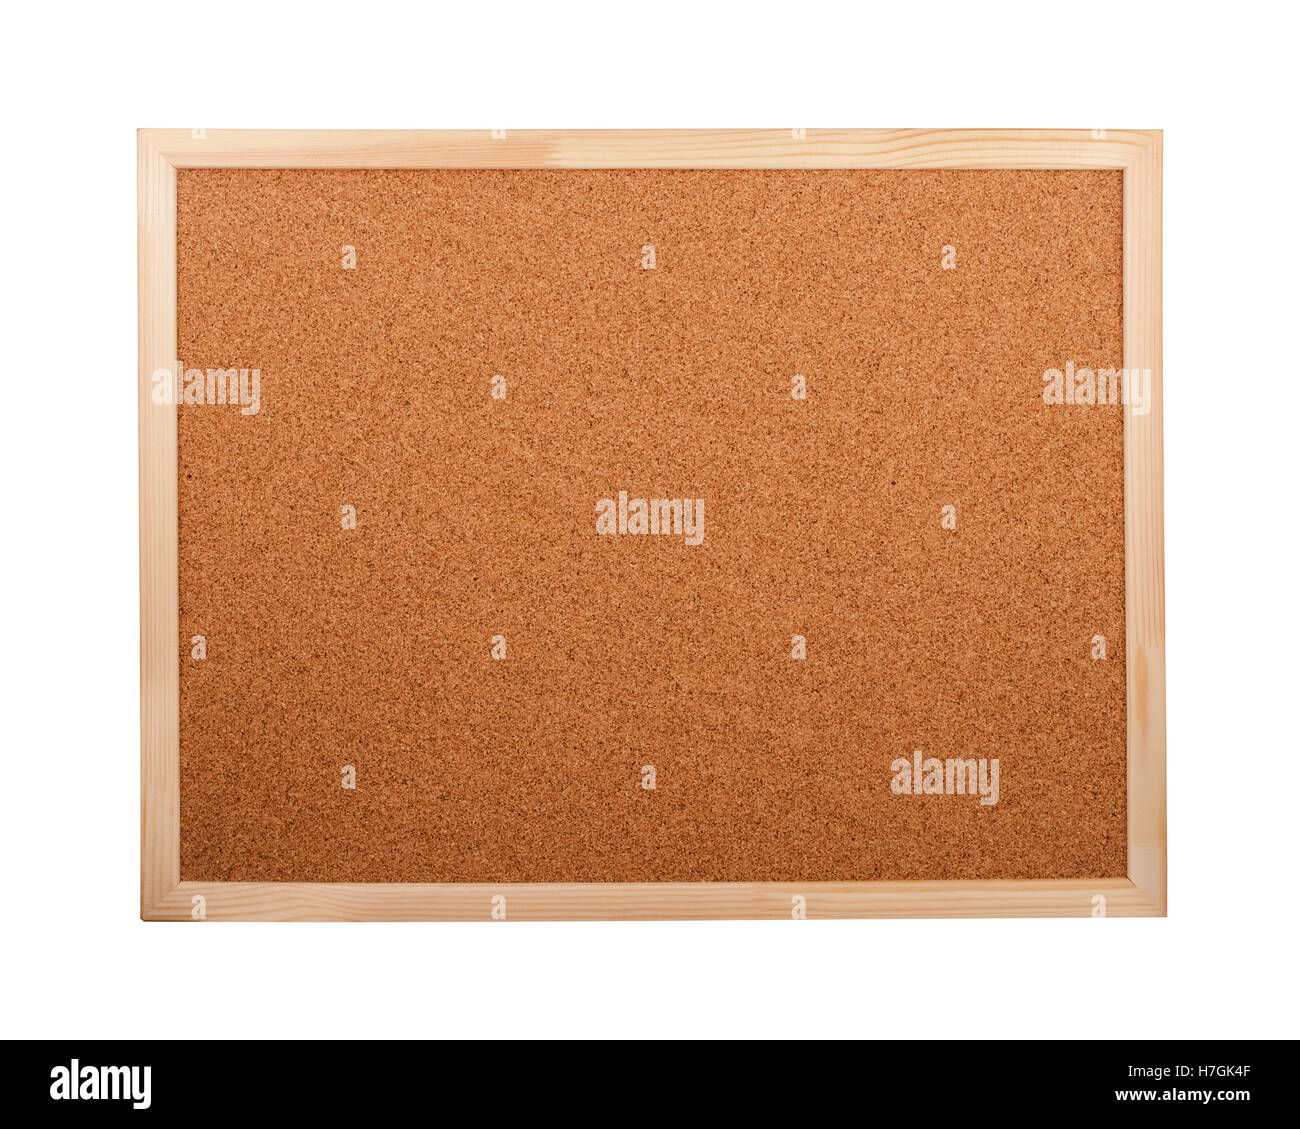 Cork board isolated on white background Stock Photo